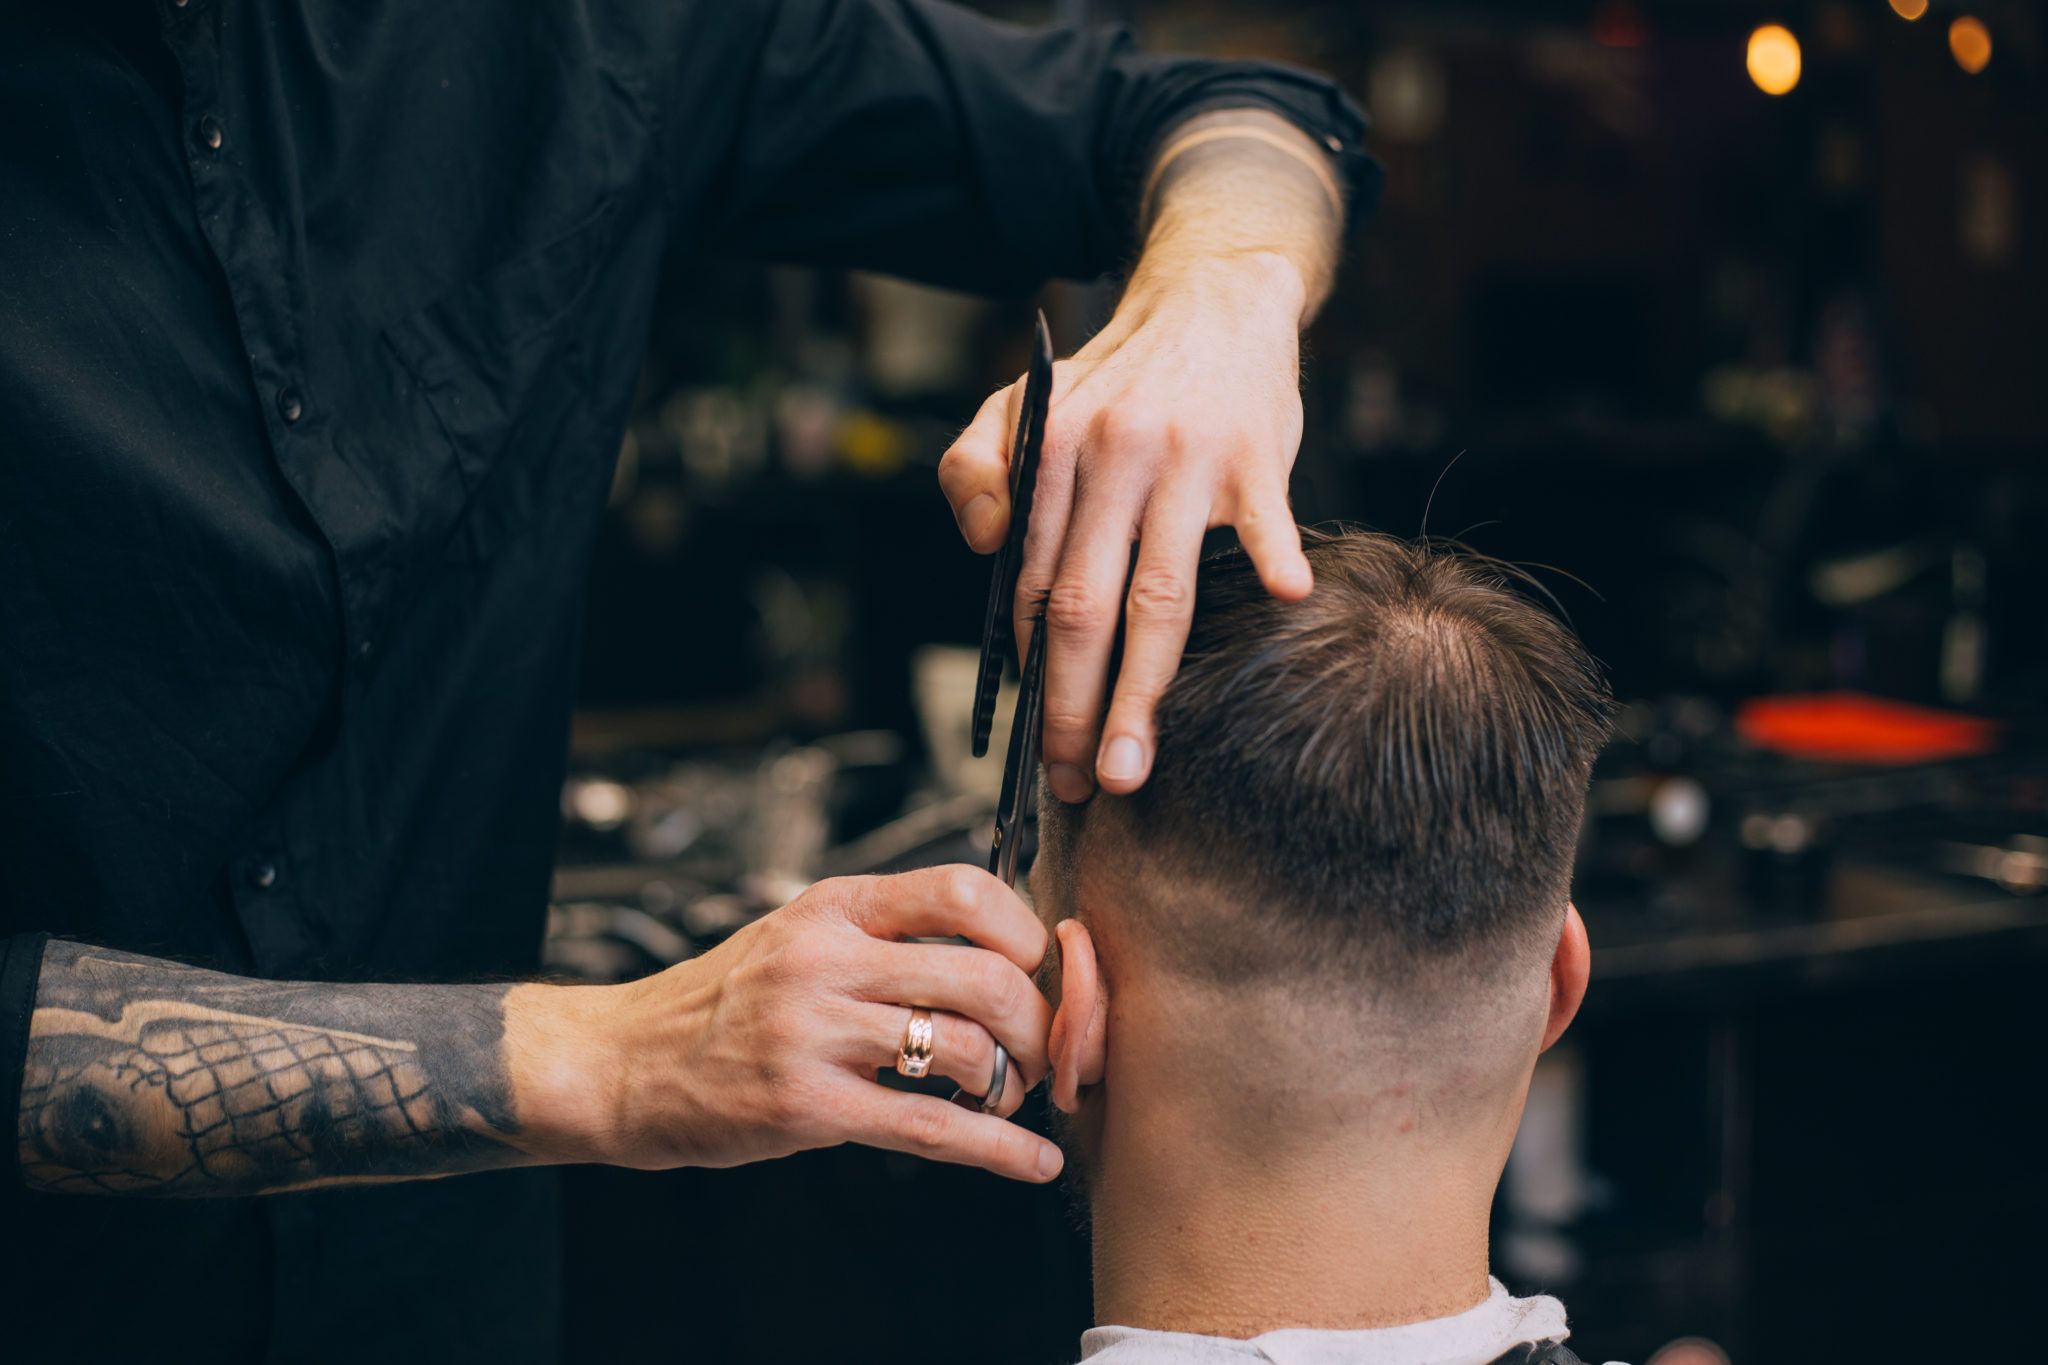 Black market haircuts ‘booming’ according to one Dublin hairdresser